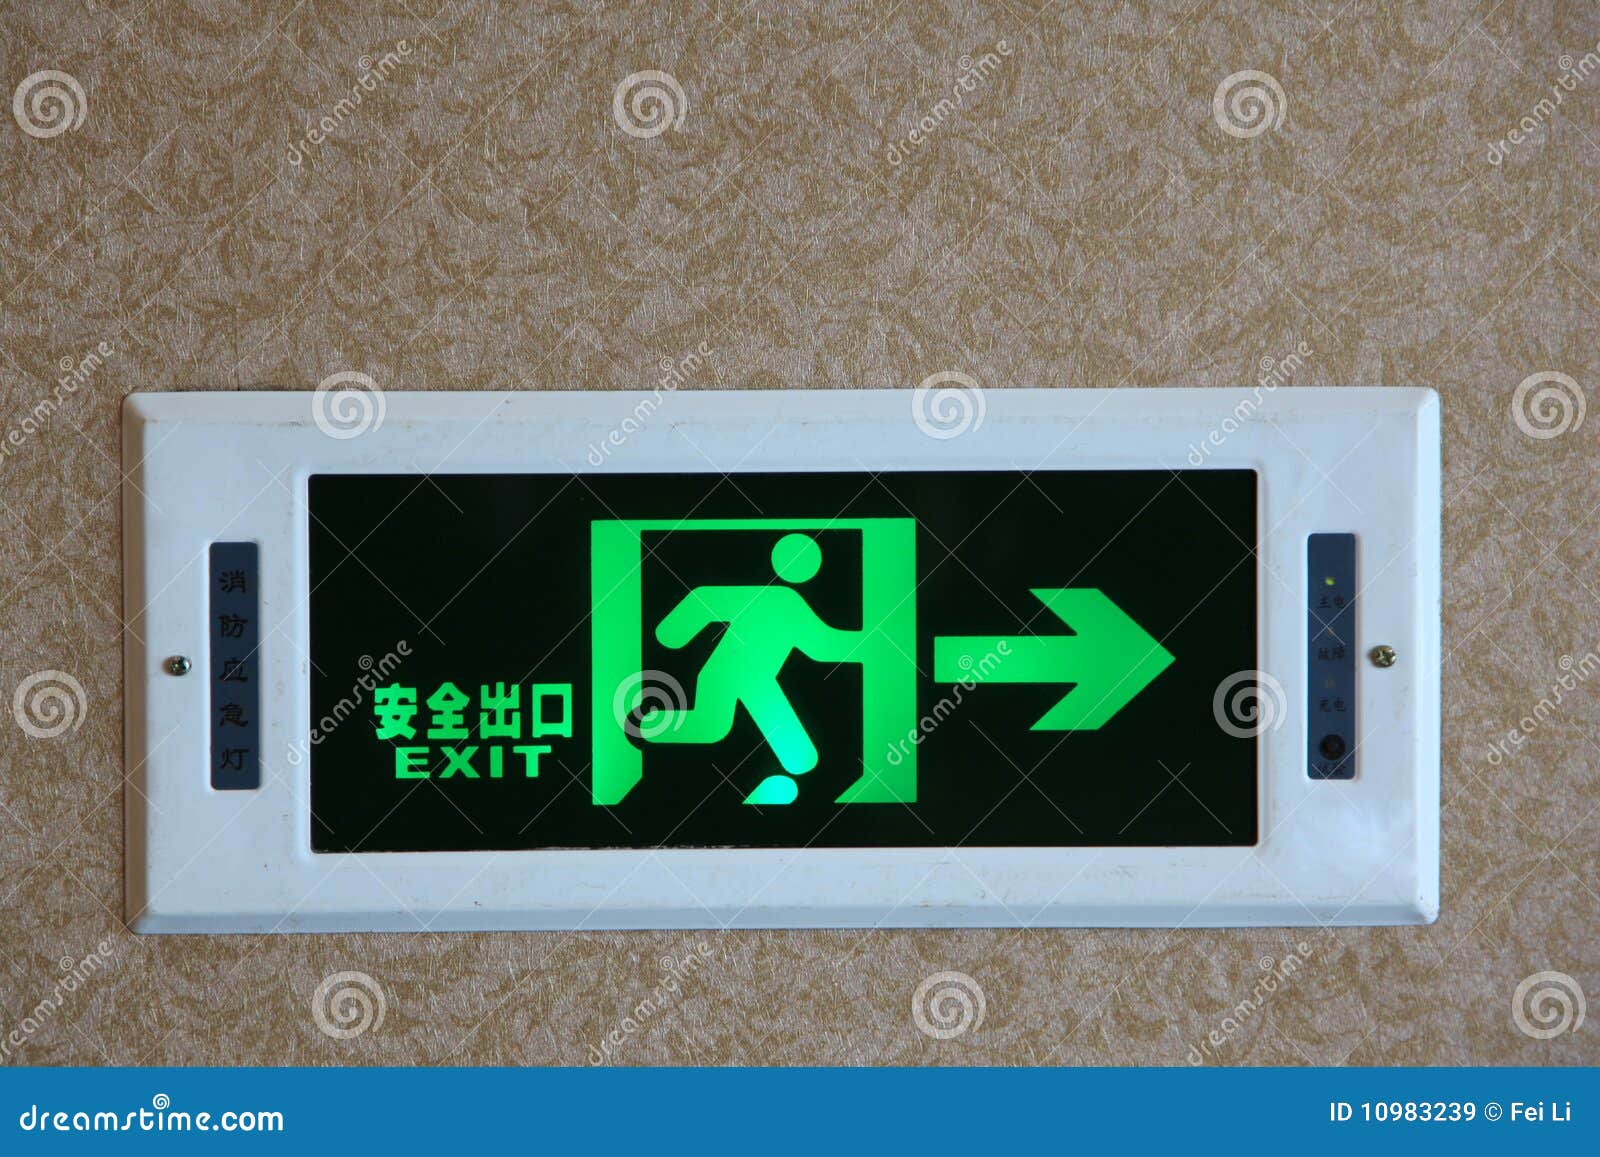 emergency-exit-sign-royalty-free-stock-images-image-10983239